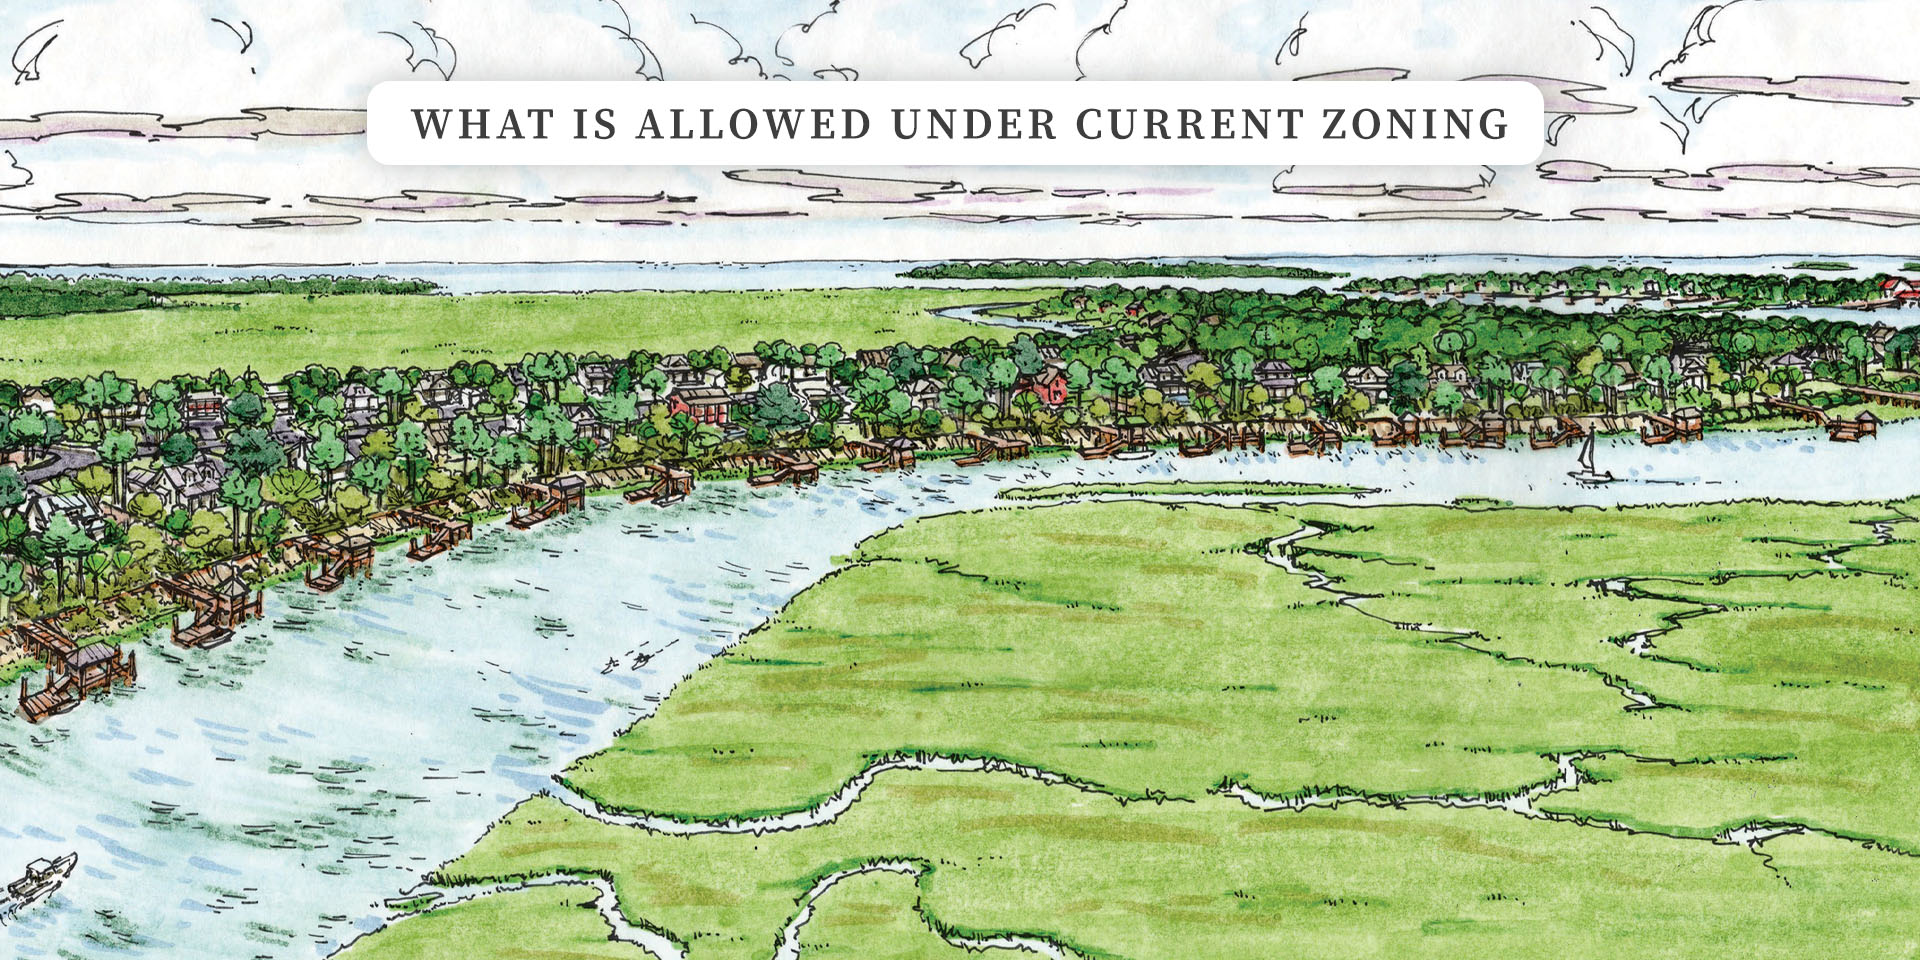 Along Village Creek: What Is Allowed Under Current Zoning